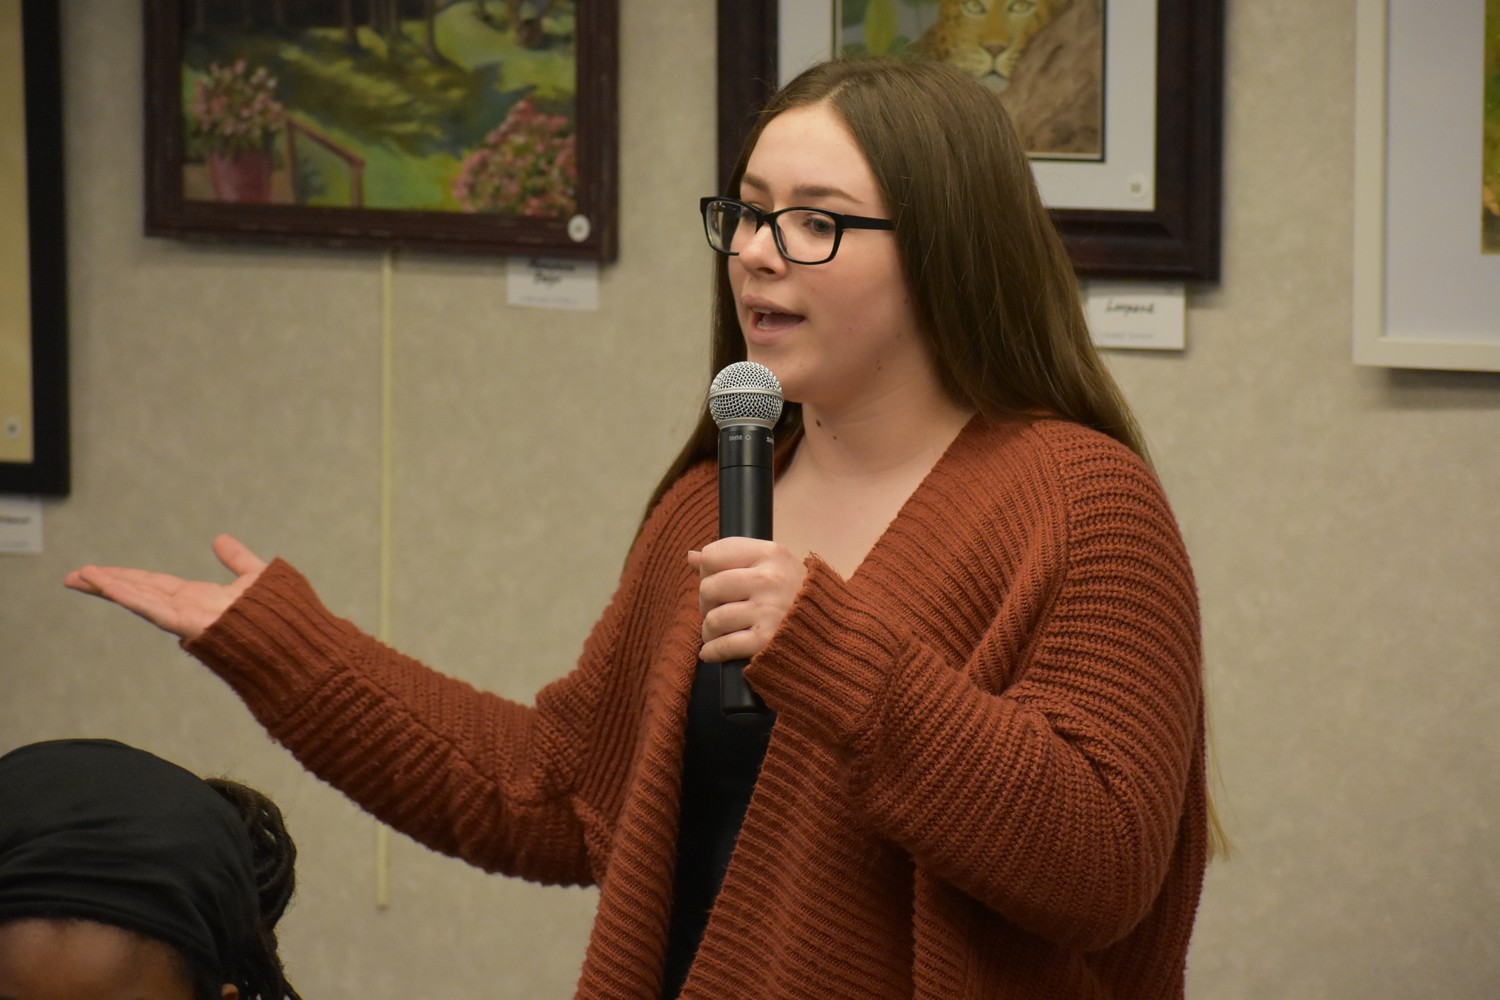 Kaitlyn Gavin, a ninth-grader at Valley Stream Memorial Junior High School, urged parents to instill values in their children at a young age.